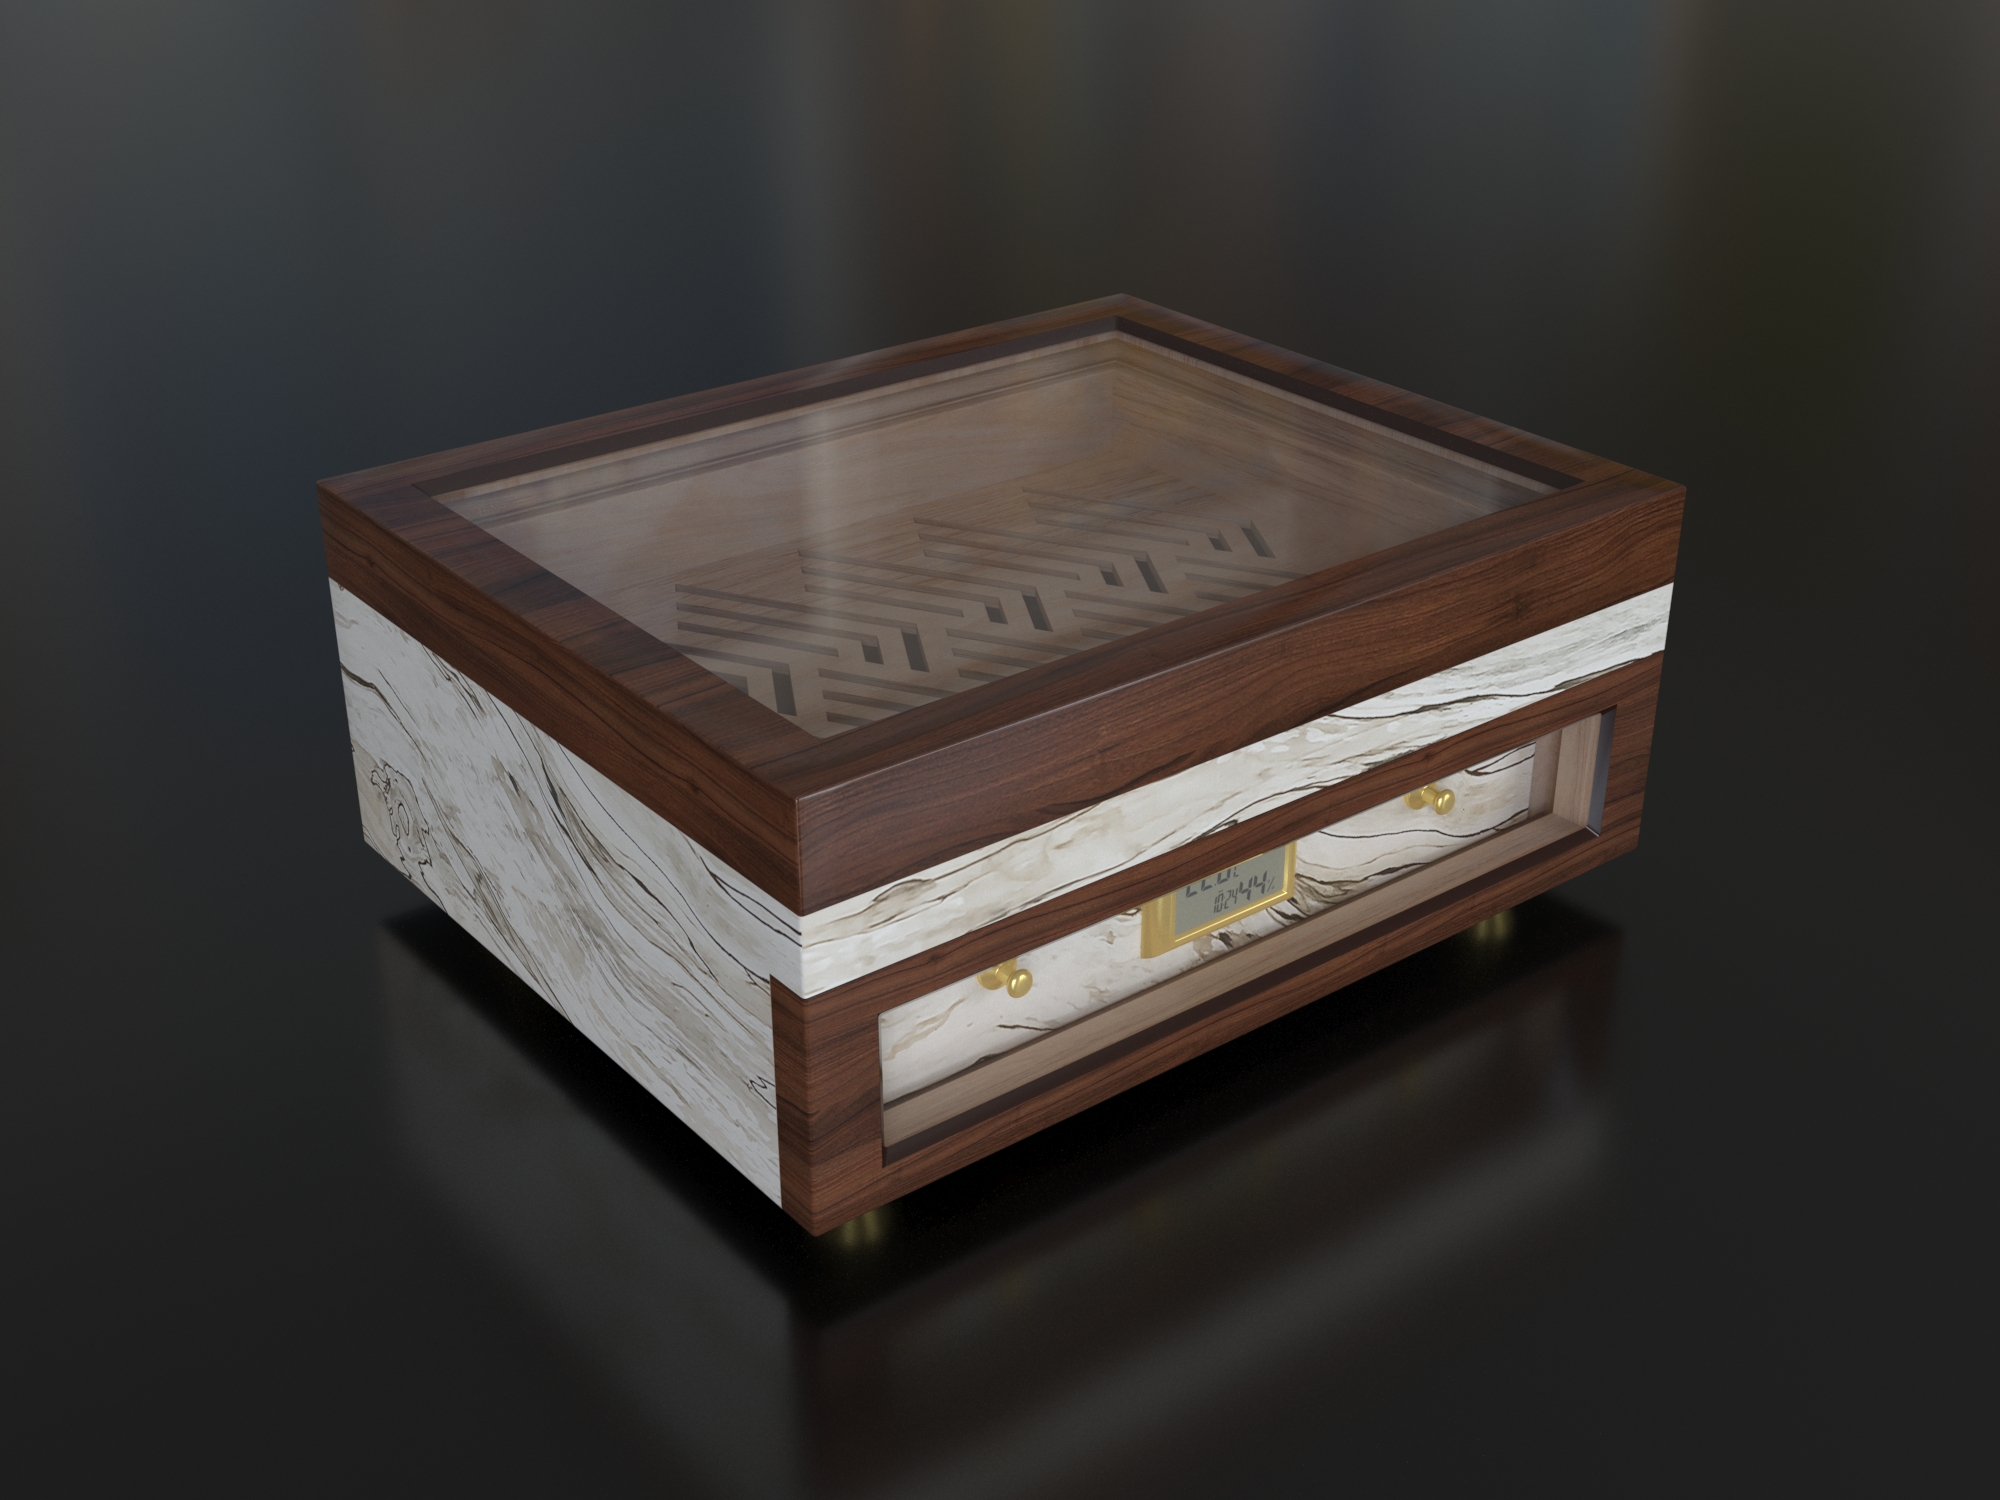  Desktop humidors with Hygrometer and Humidifier 10